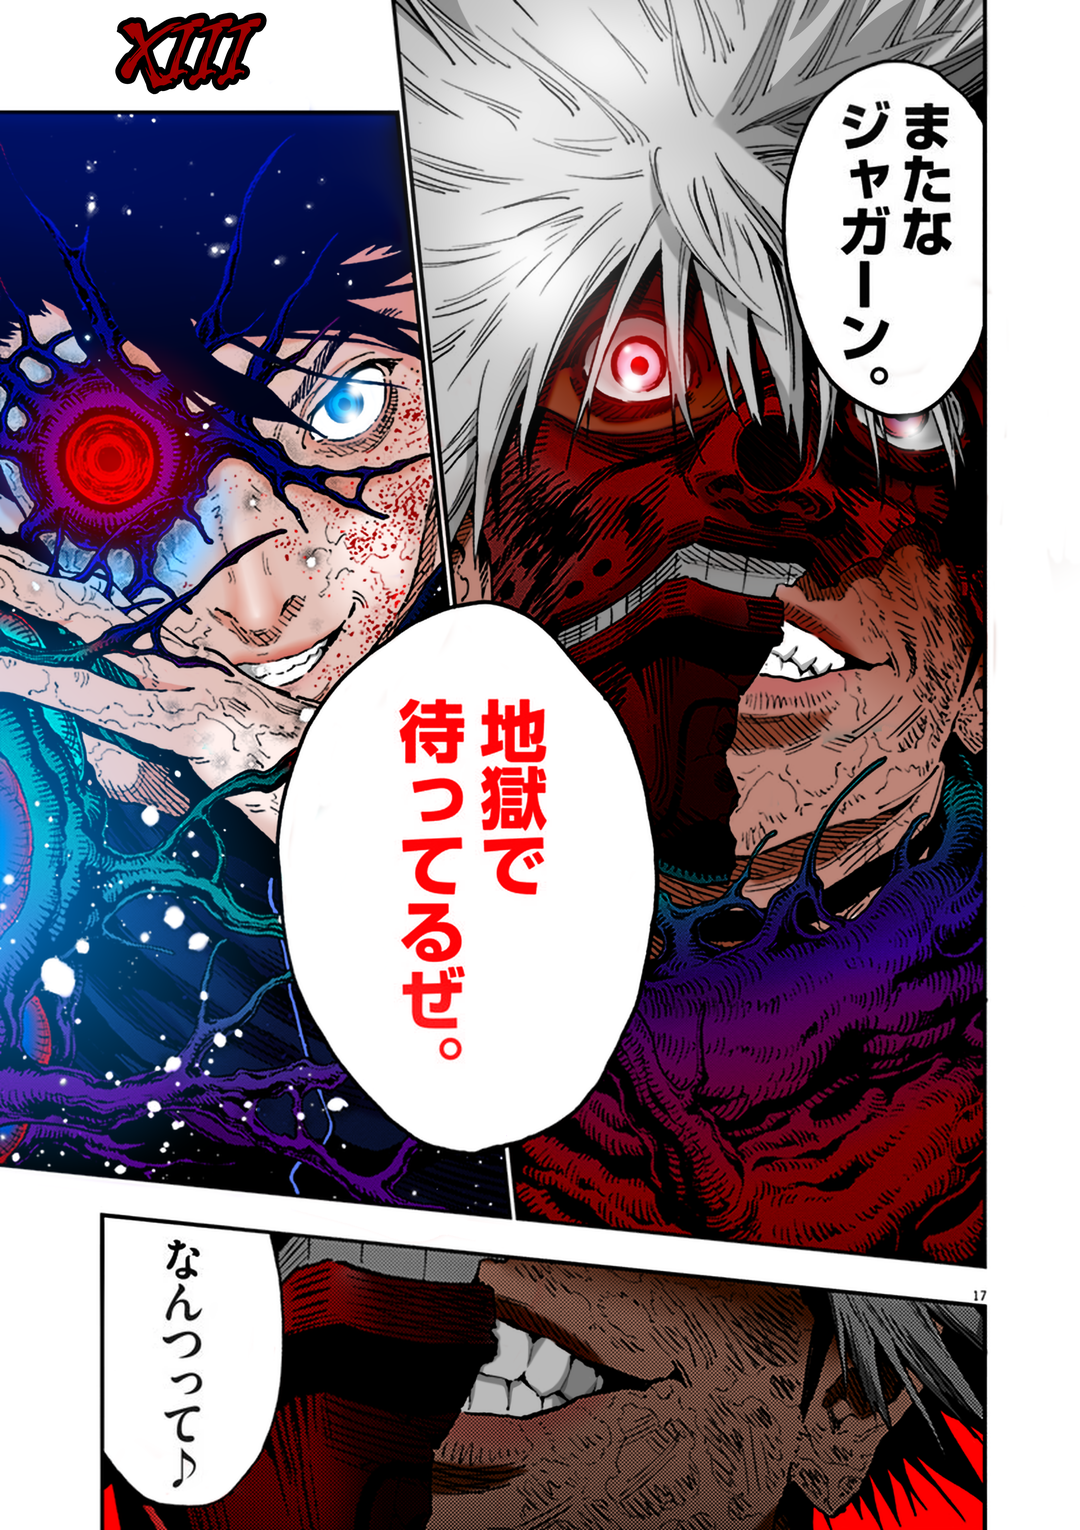 Best R Jagaaaaaan Image On Pholder. Colored This Page